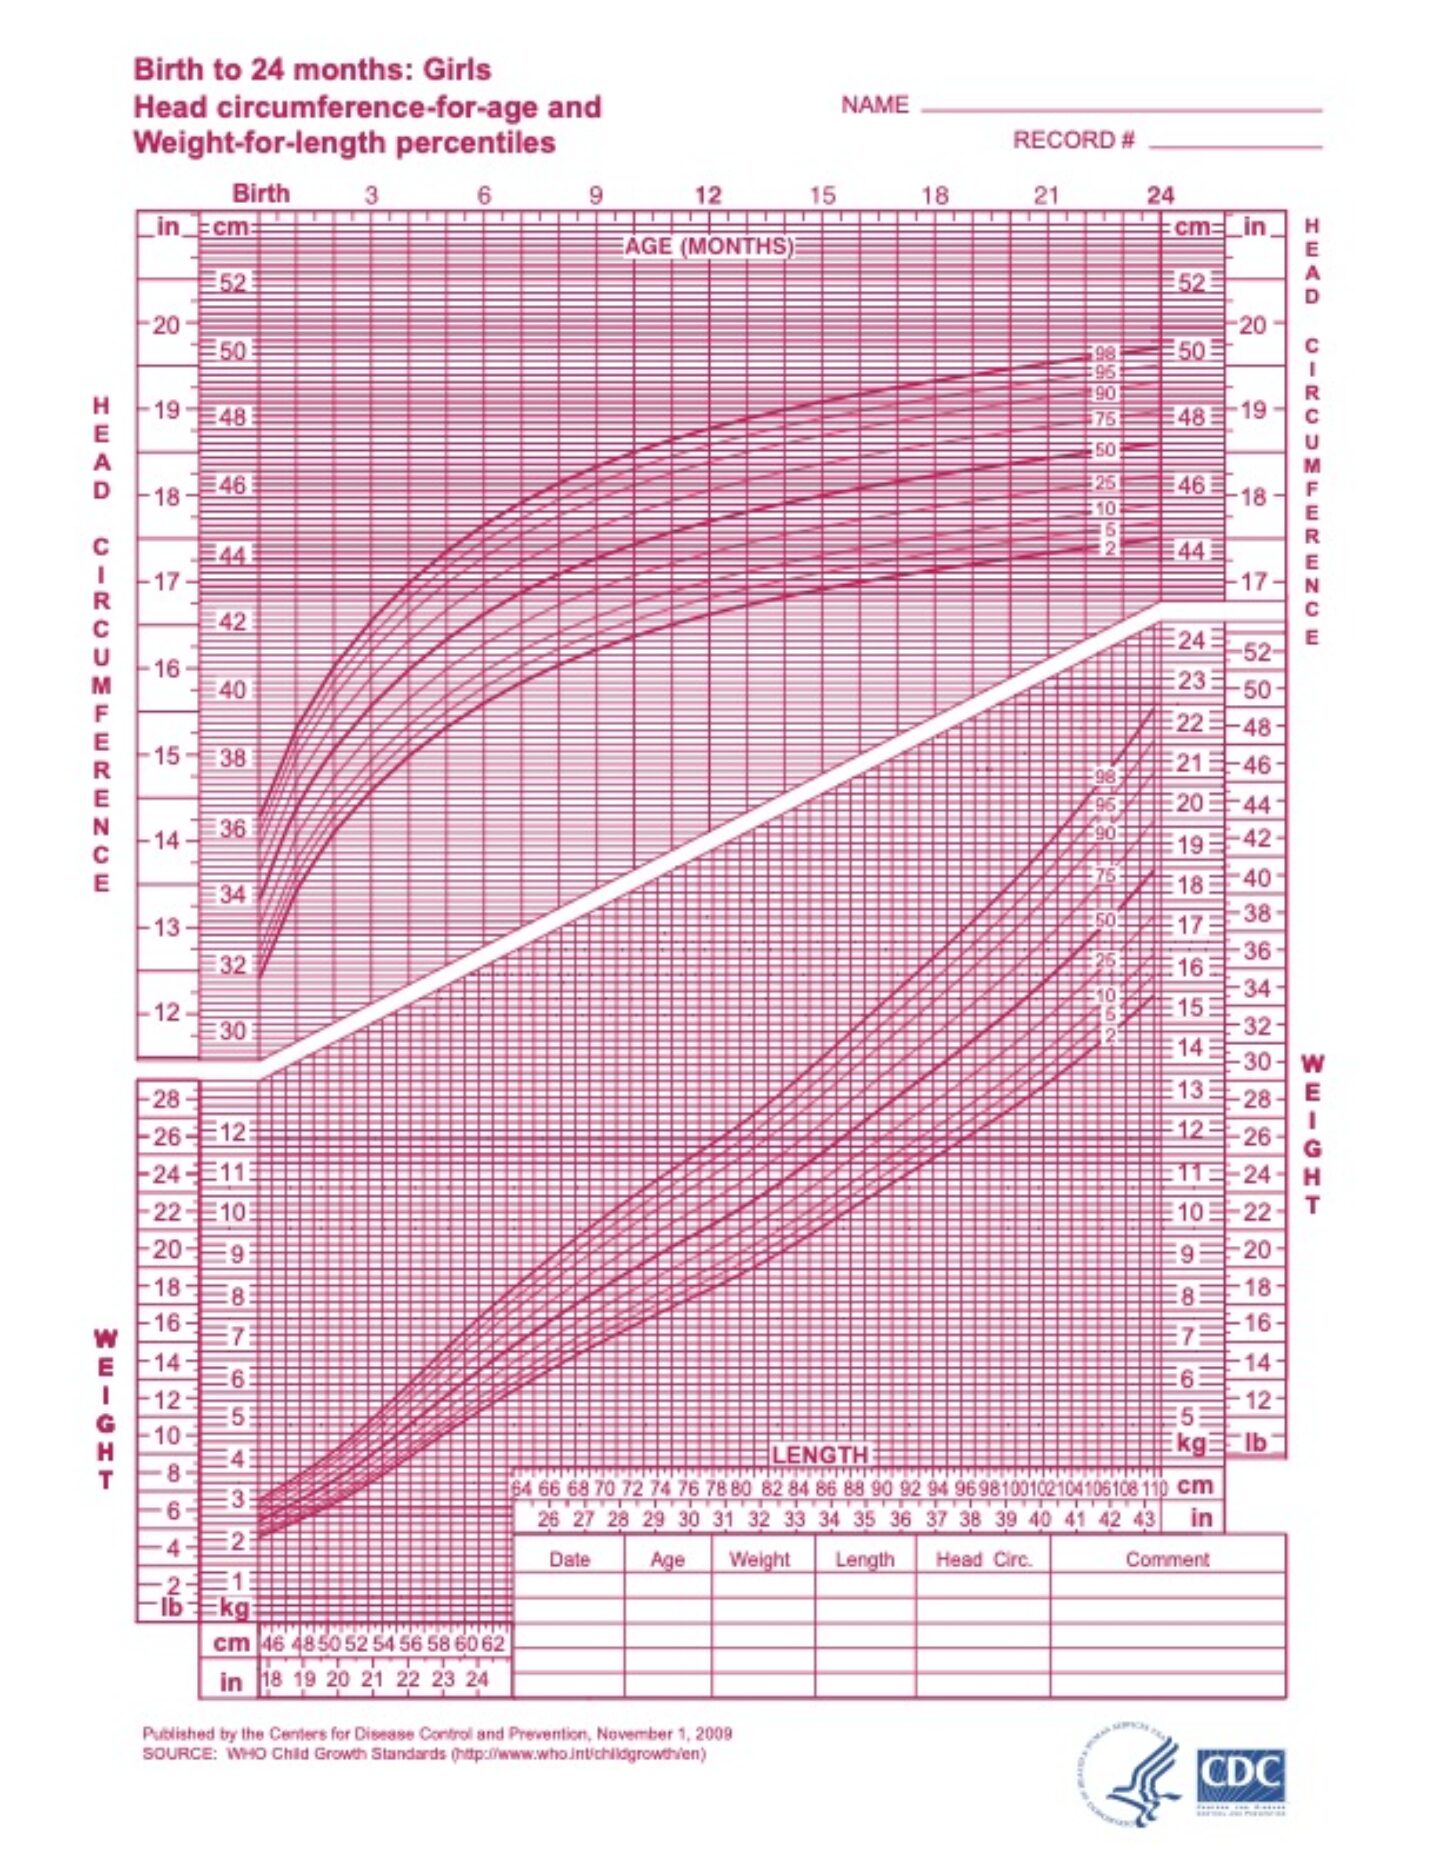 WHO Growth Charts, courtesy of CDC. Girls birth to 24 months, weight-for-length.